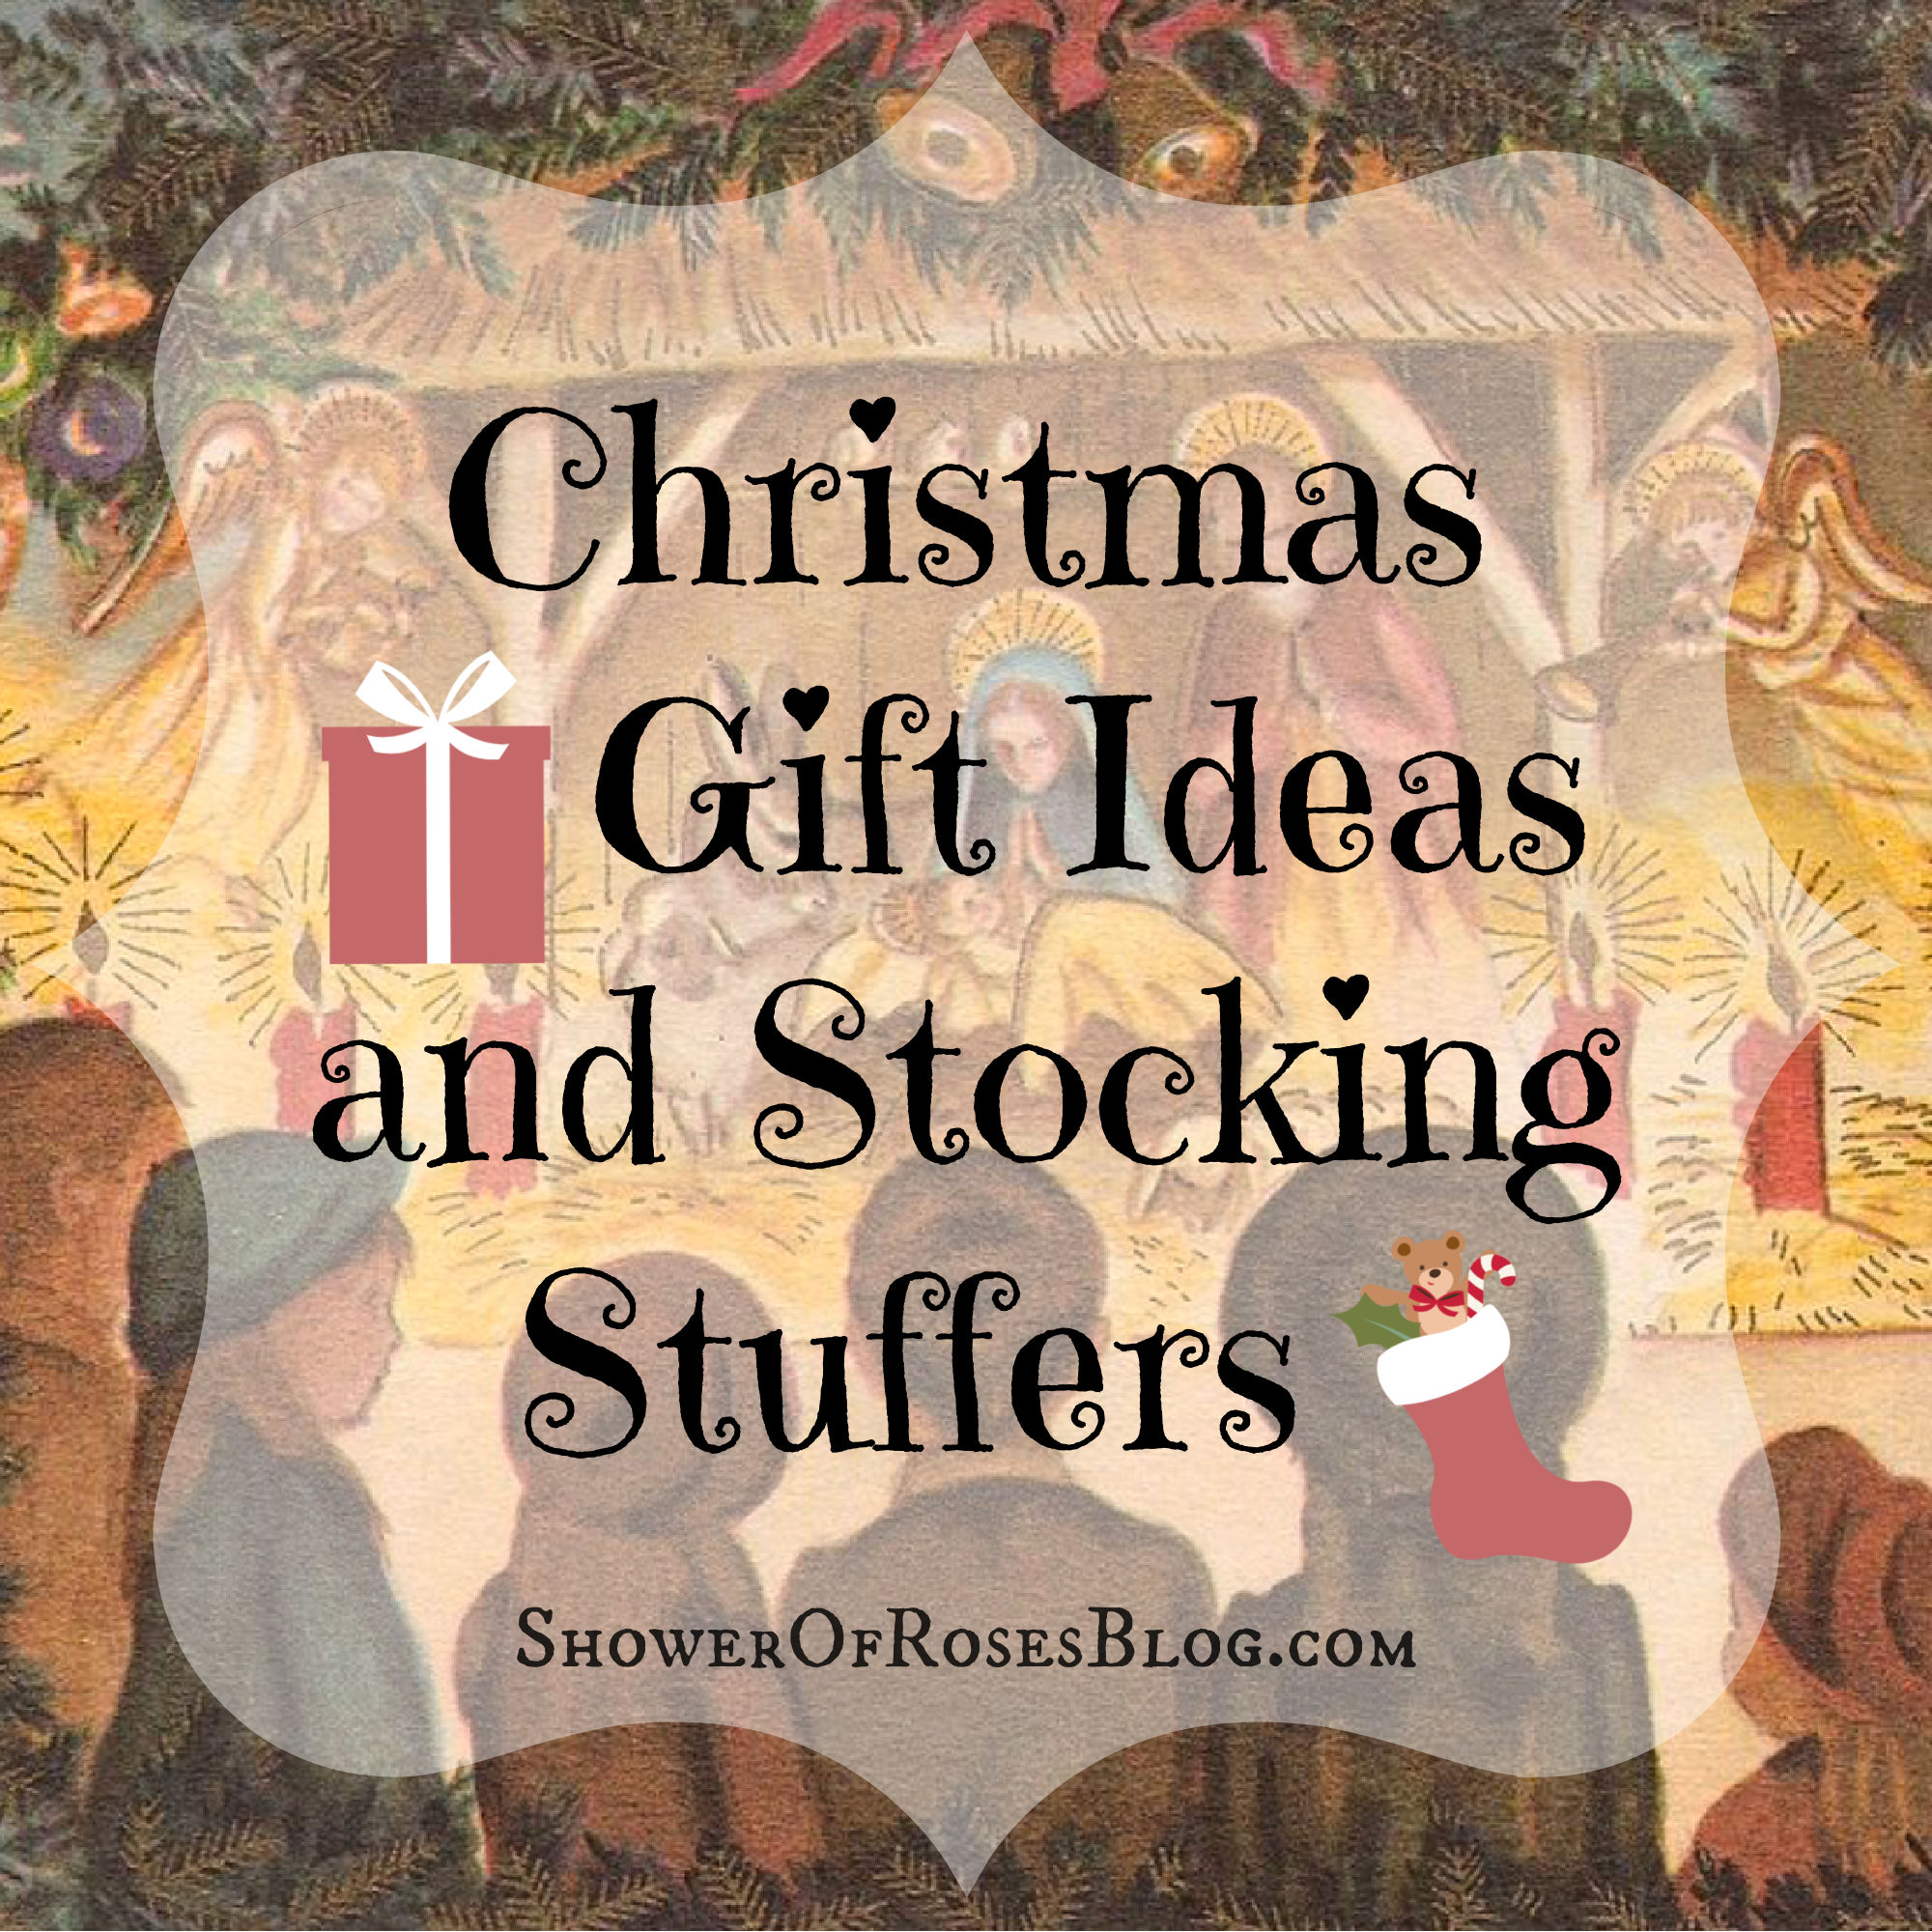 100+ Stocking Stuffers for Everyone On Your Gift List